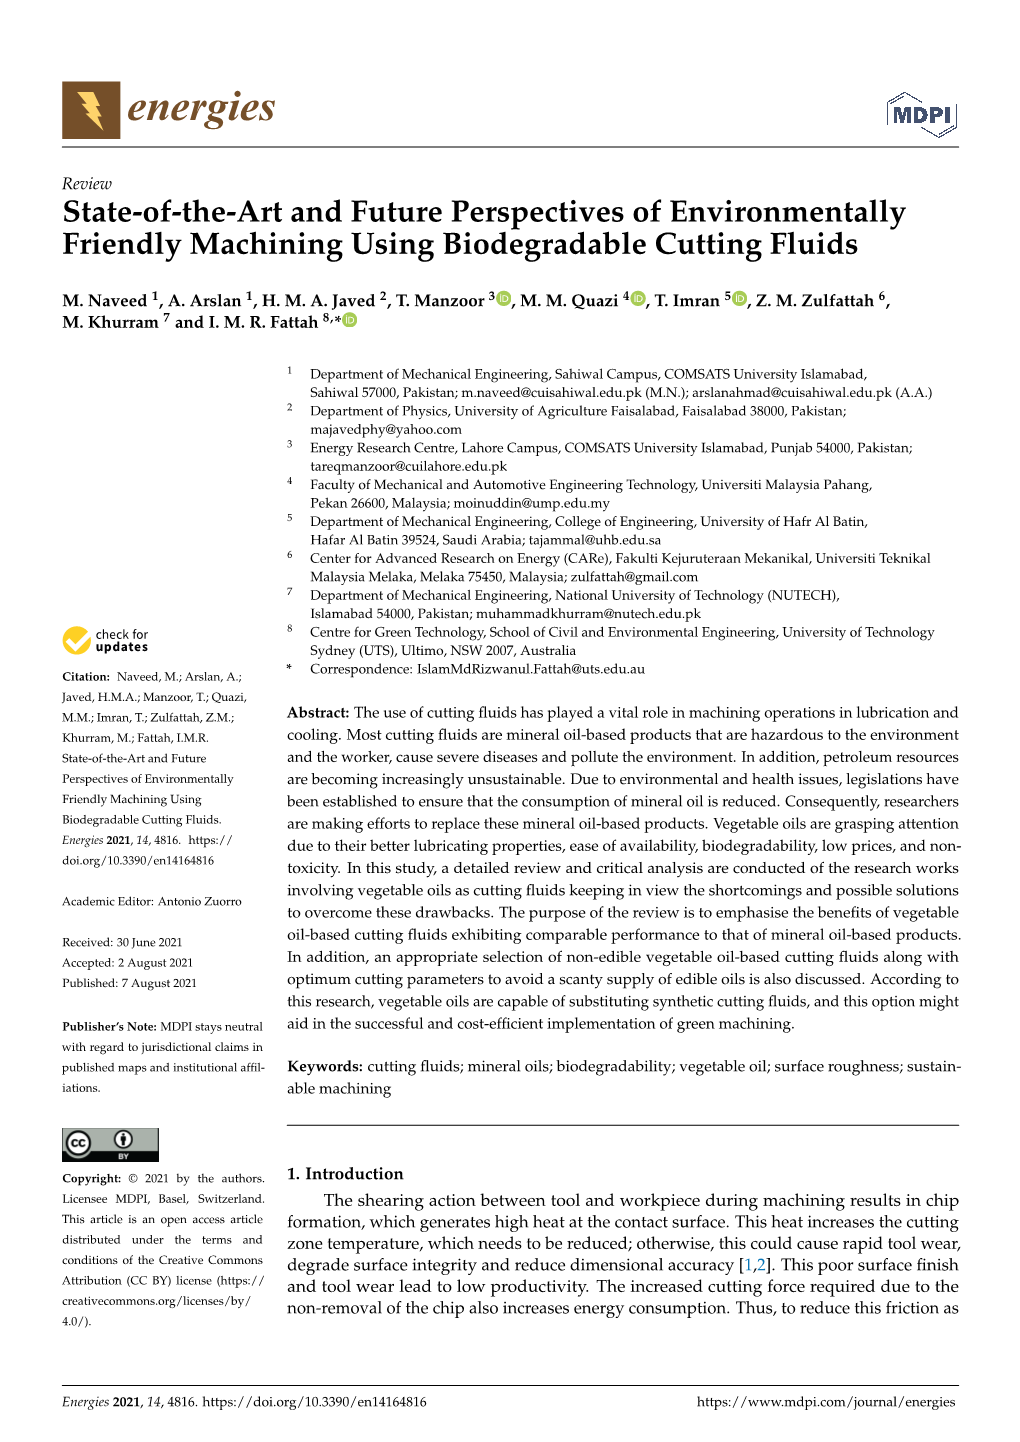 State-Of-The-Art and Future Perspectives of Environmentally Friendly Machining Using Biodegradable Cutting Fluids